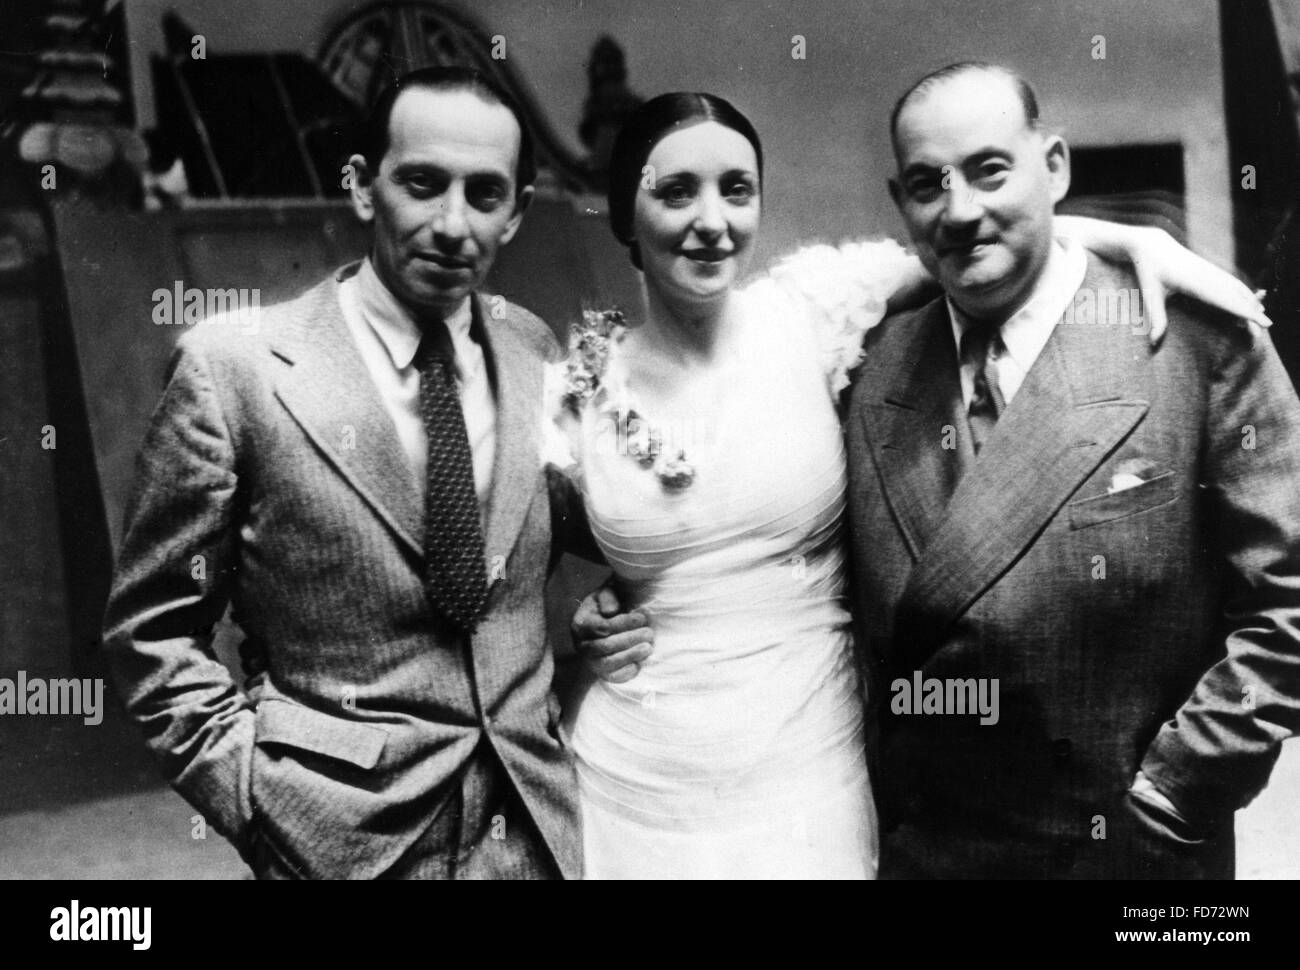 Paul Abraham, Anny Ahlers and Alfred Rotter, 1931 Stock Photo - Alamy